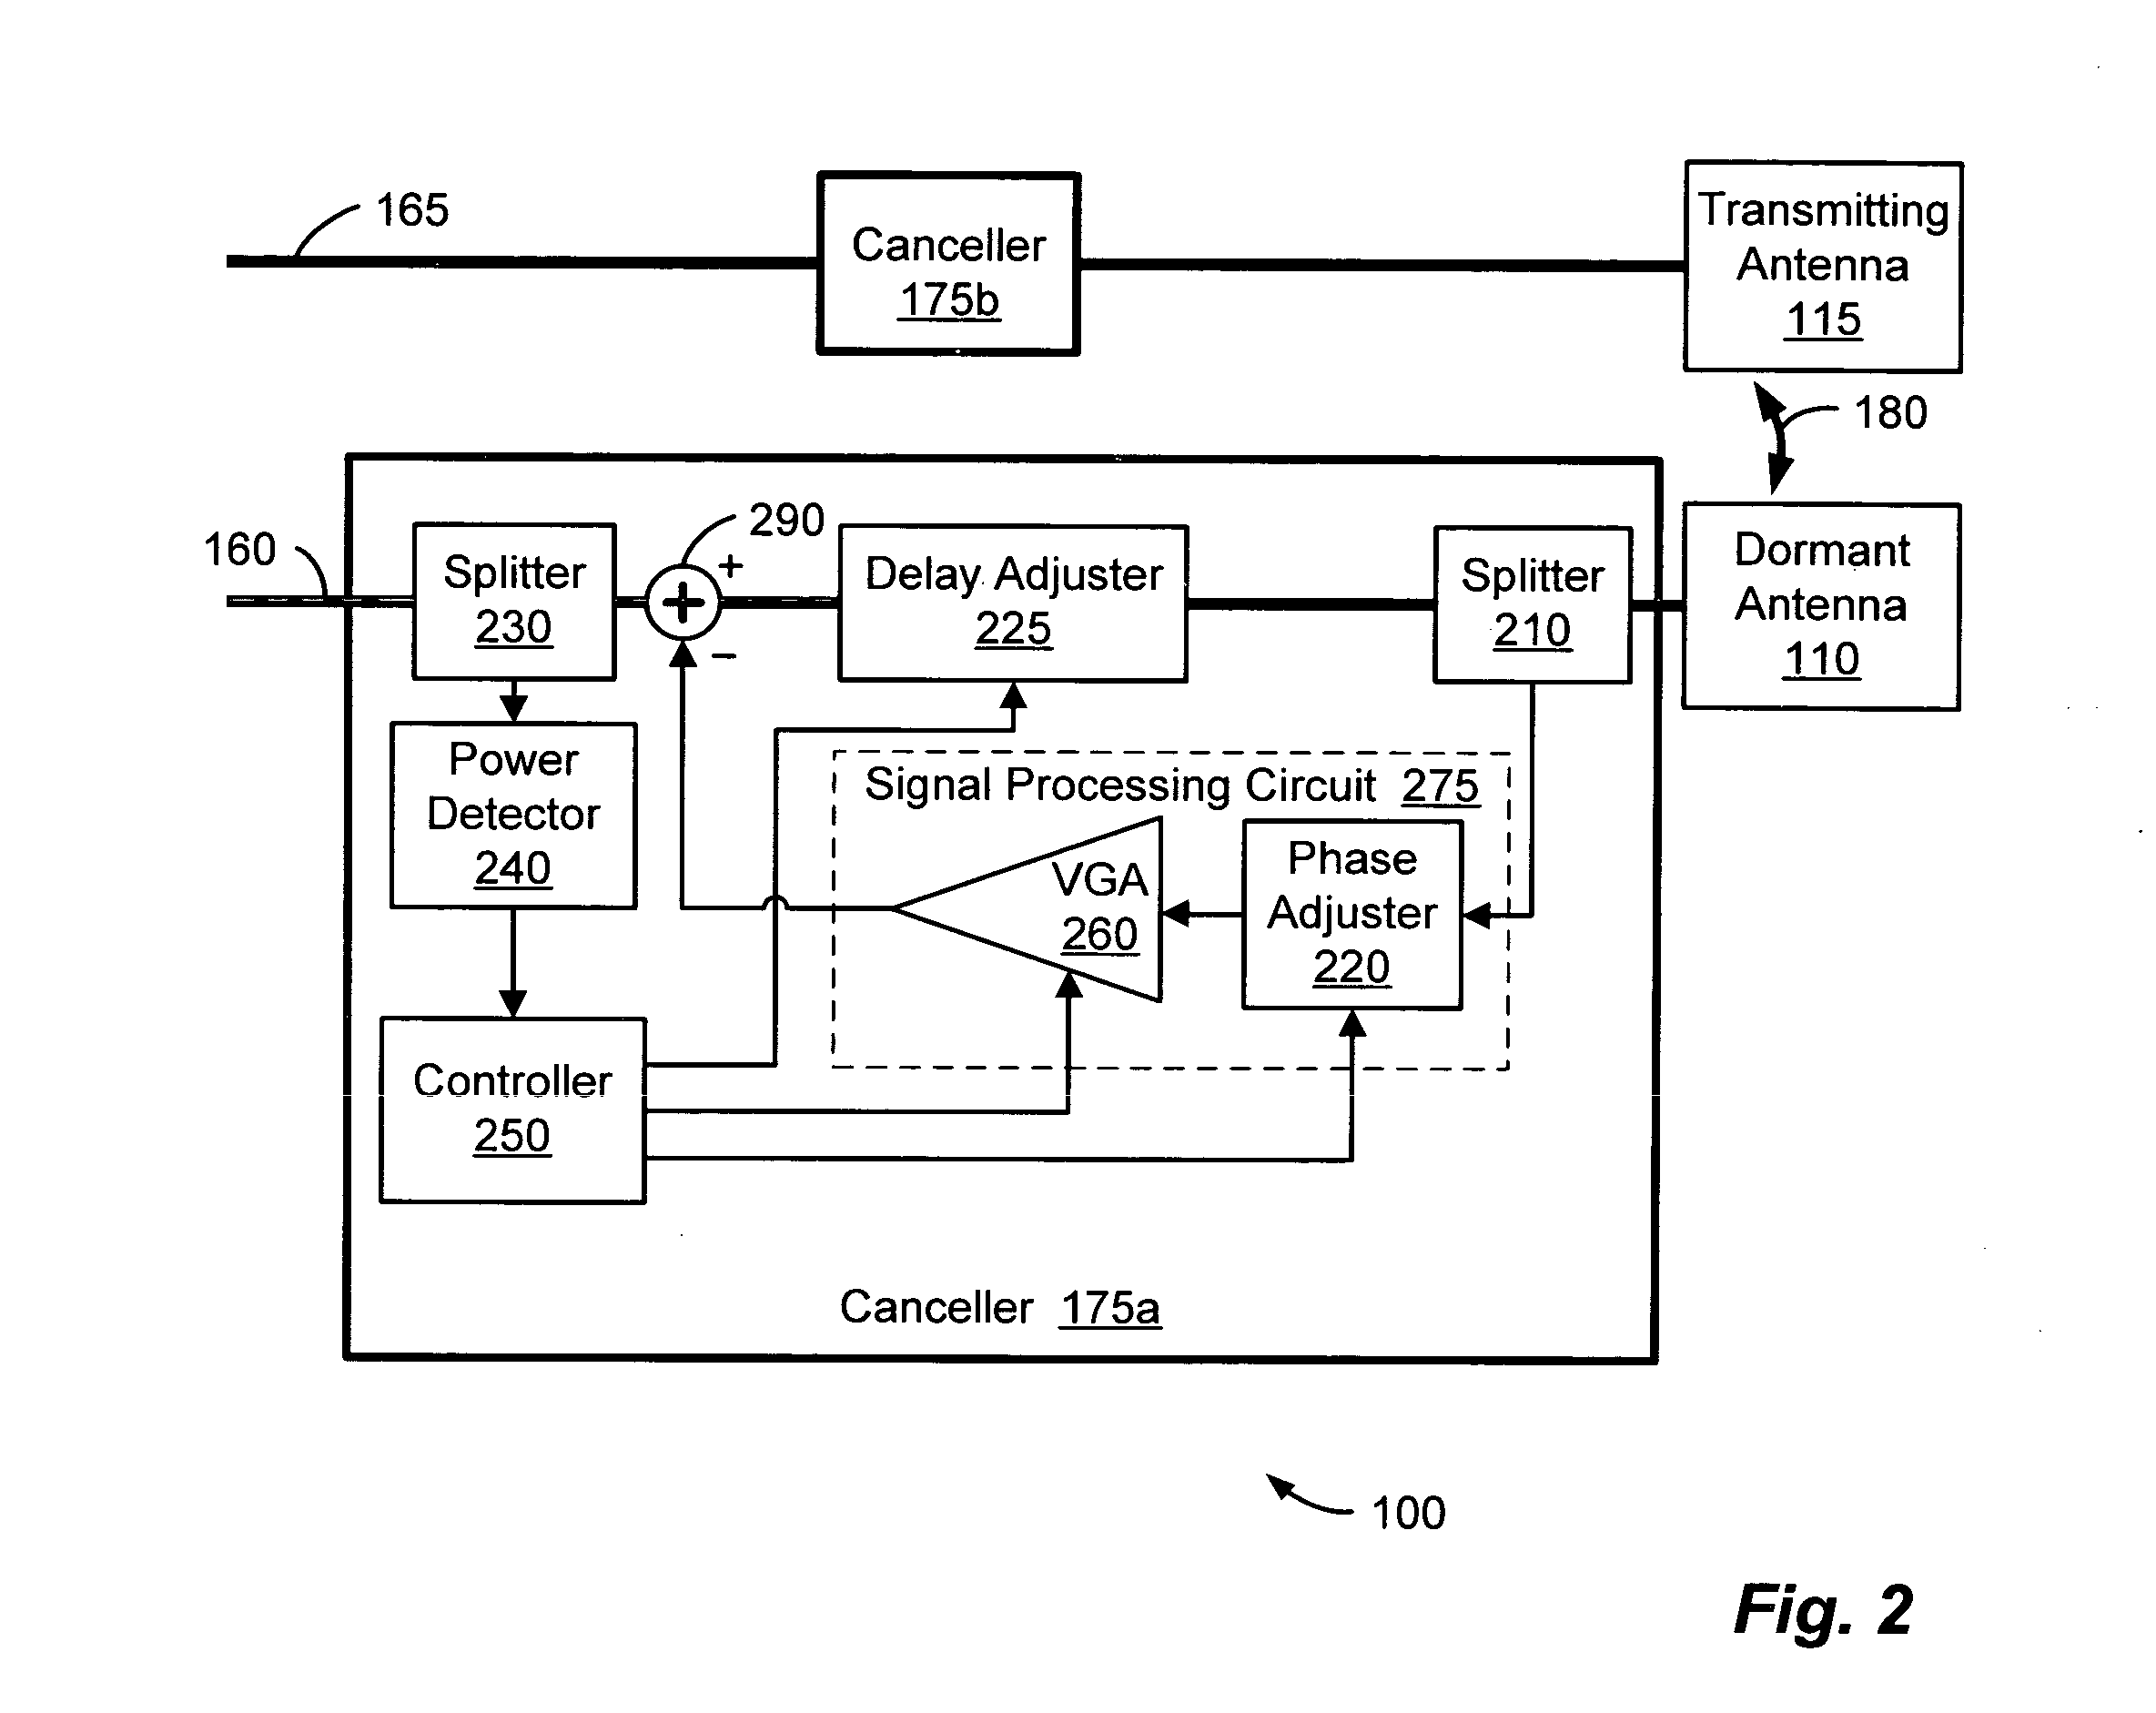 Method and system for antenna interference cancellation